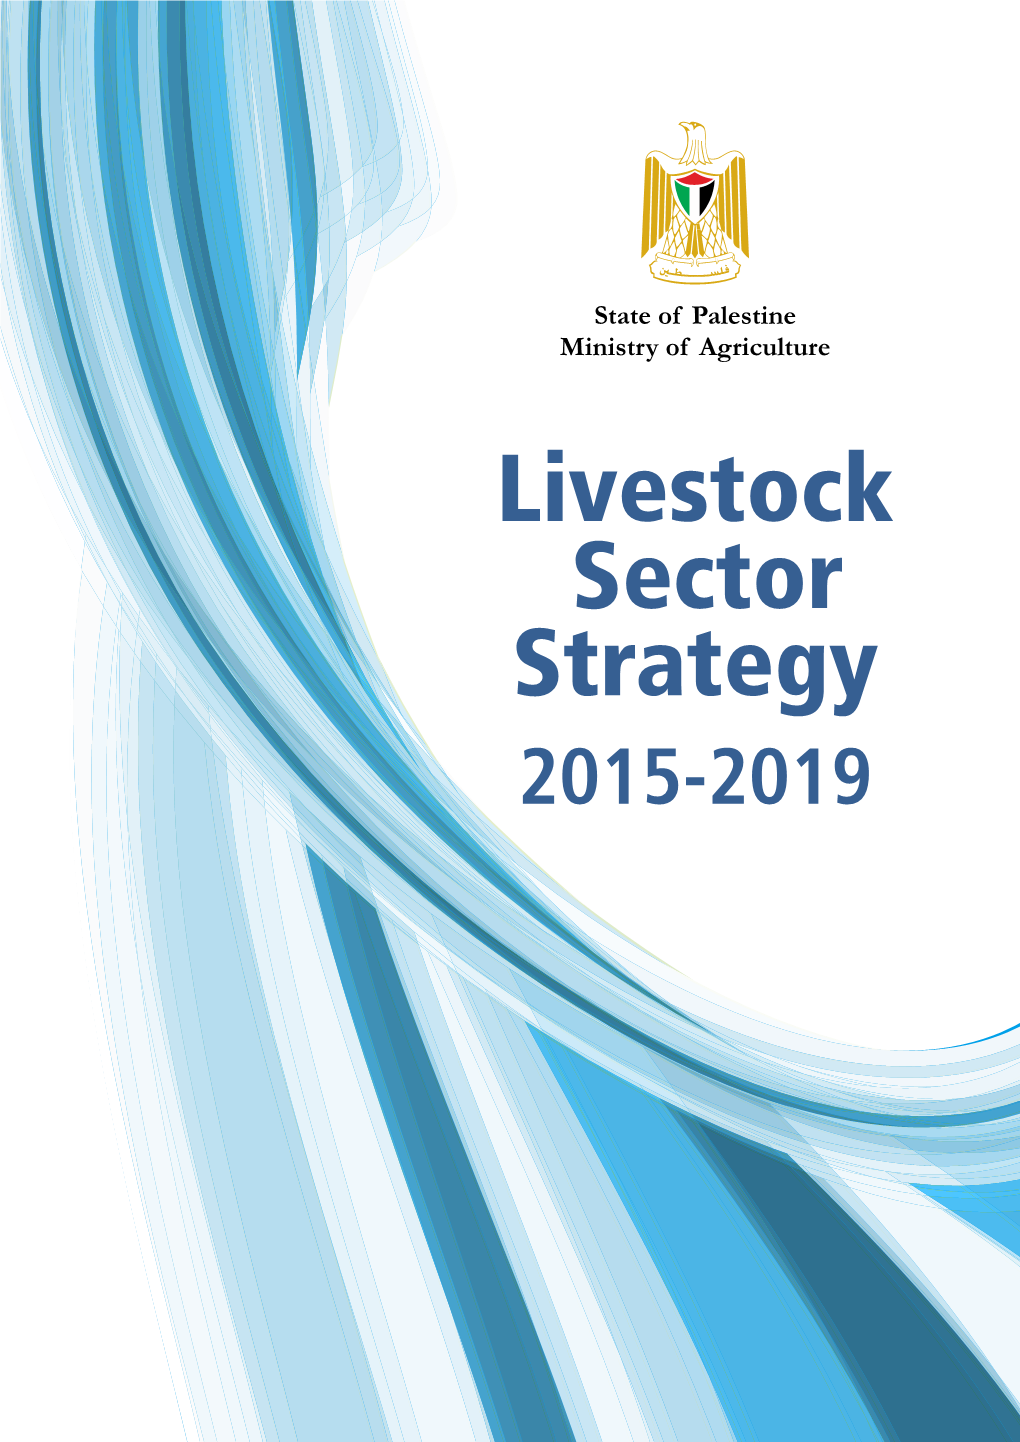 Livestock Sector Strategy 2015-2019